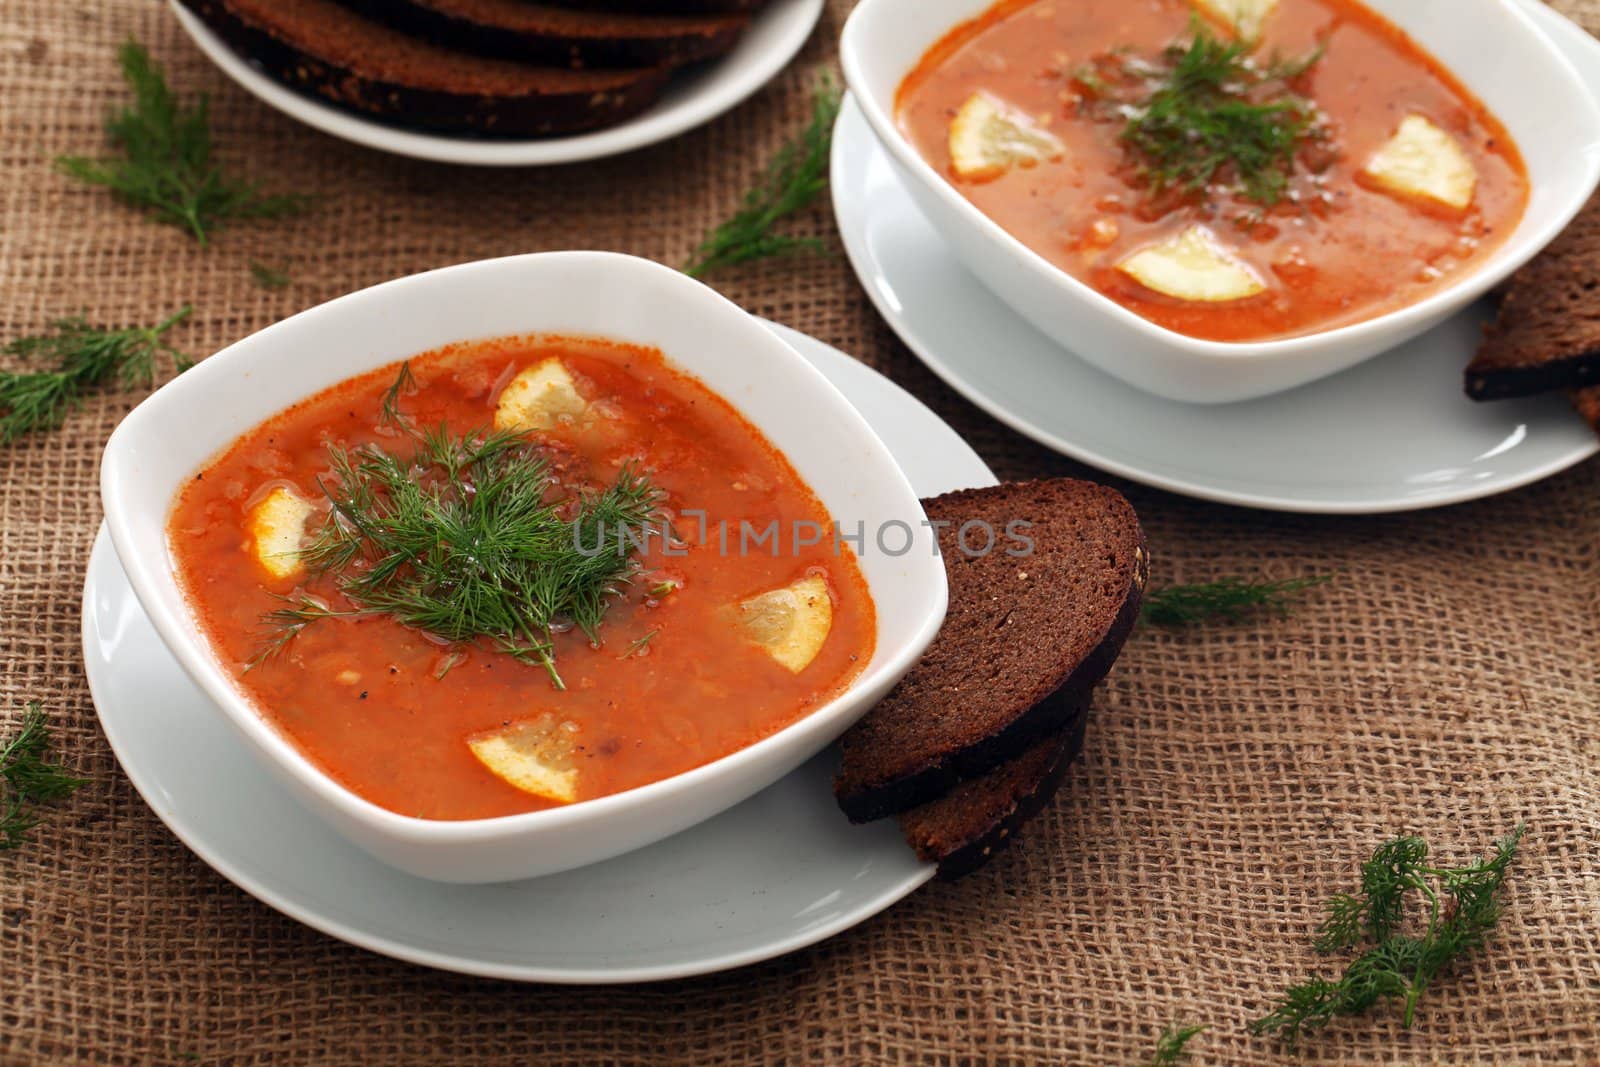 Image of bowls of hot red soup served with bread on a beige tablecloth